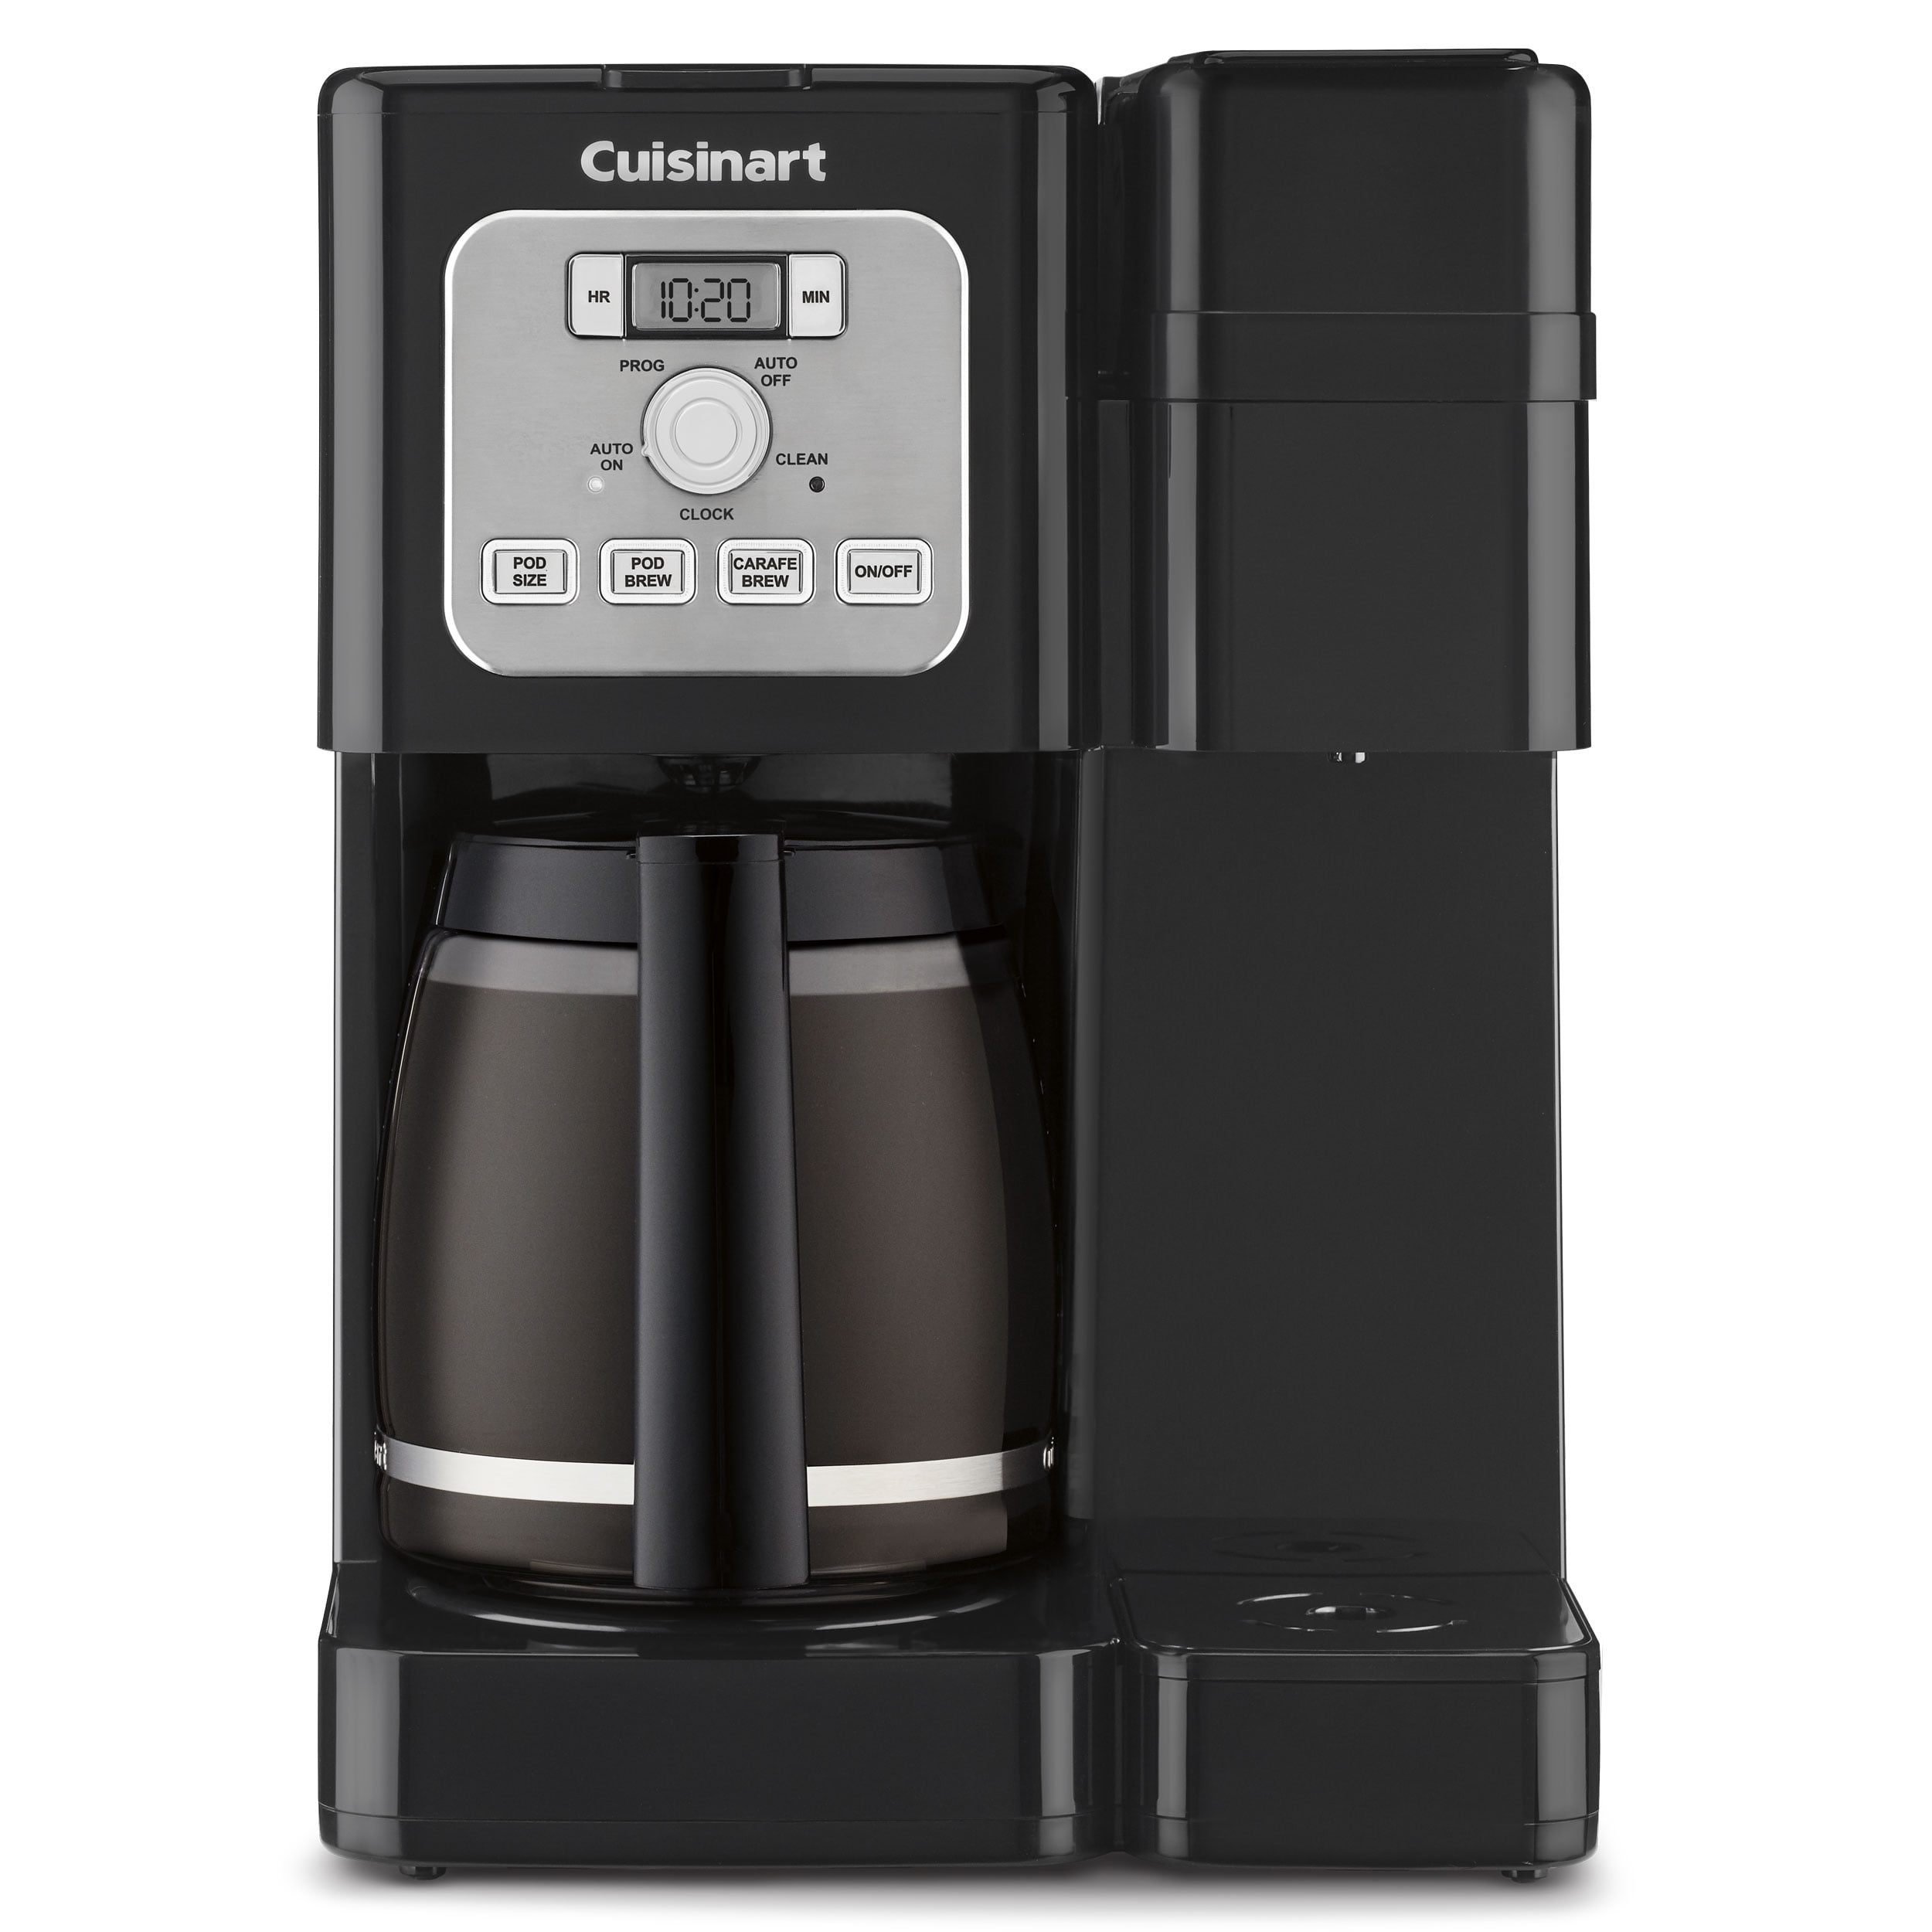 Cuisinart Coffee Center 12-Cup Coffee Maker and Single-Serve Brewer, Single  Serve Brewer Offers 3-Sizes6-Ounces, 8-Ounces and 10-Ounces, Stainless  Steel/Black - SS-15P1 